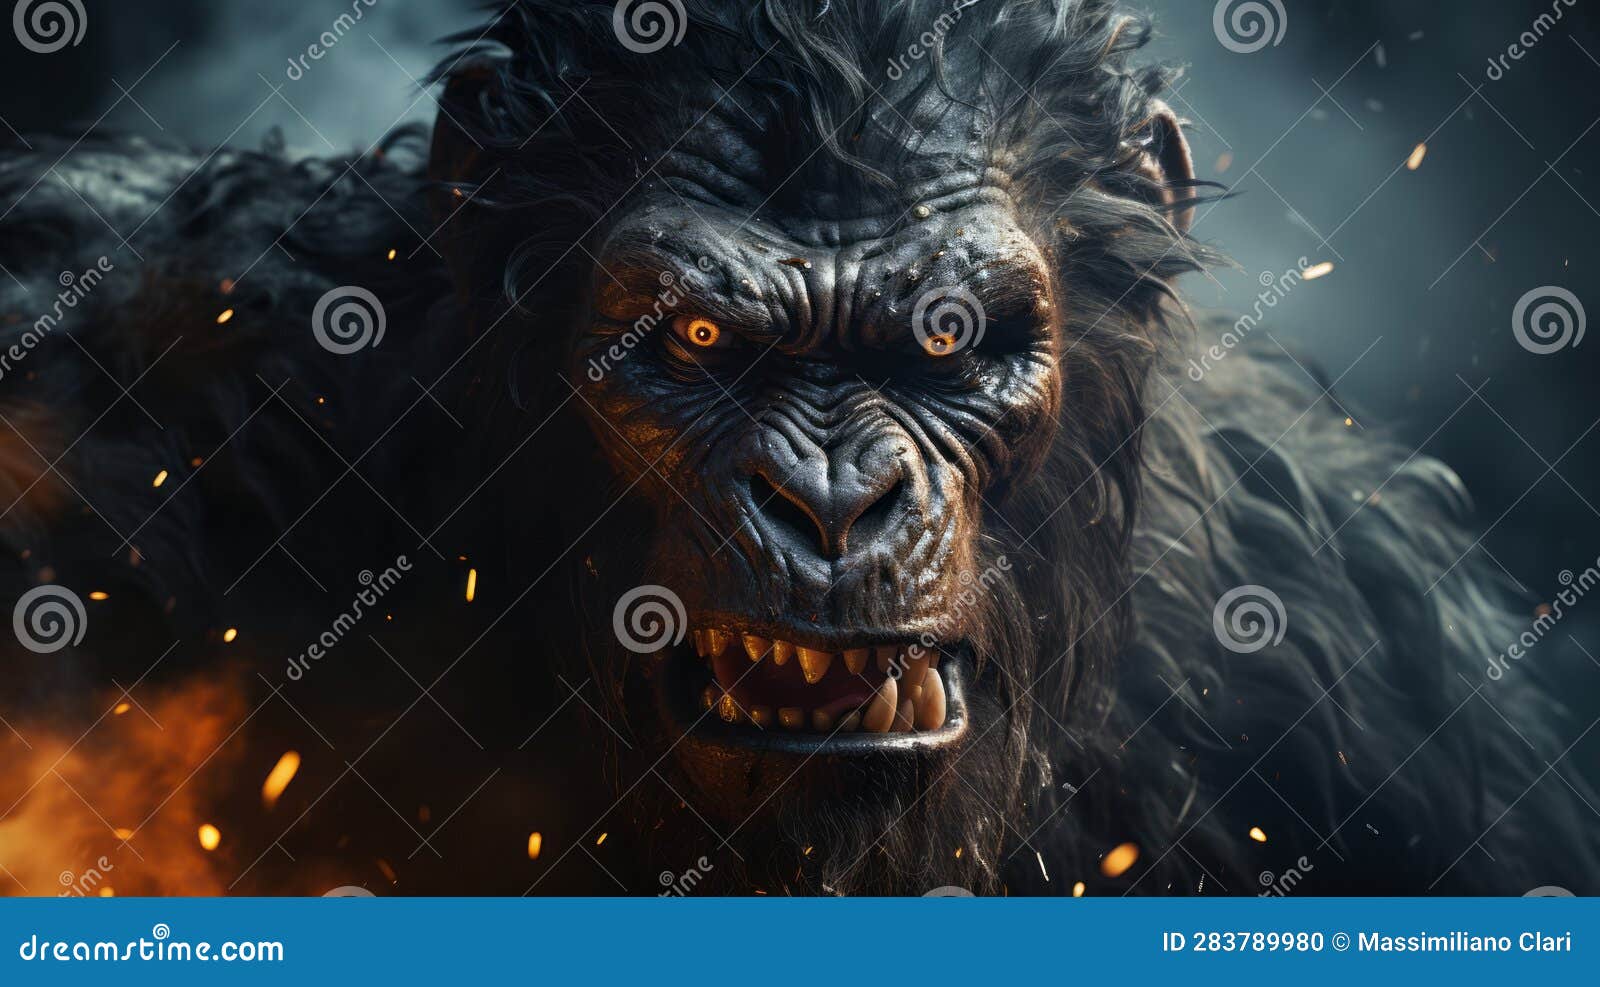 The Image Shows a Fierce-looking Gorilla in Front of an Intense ...